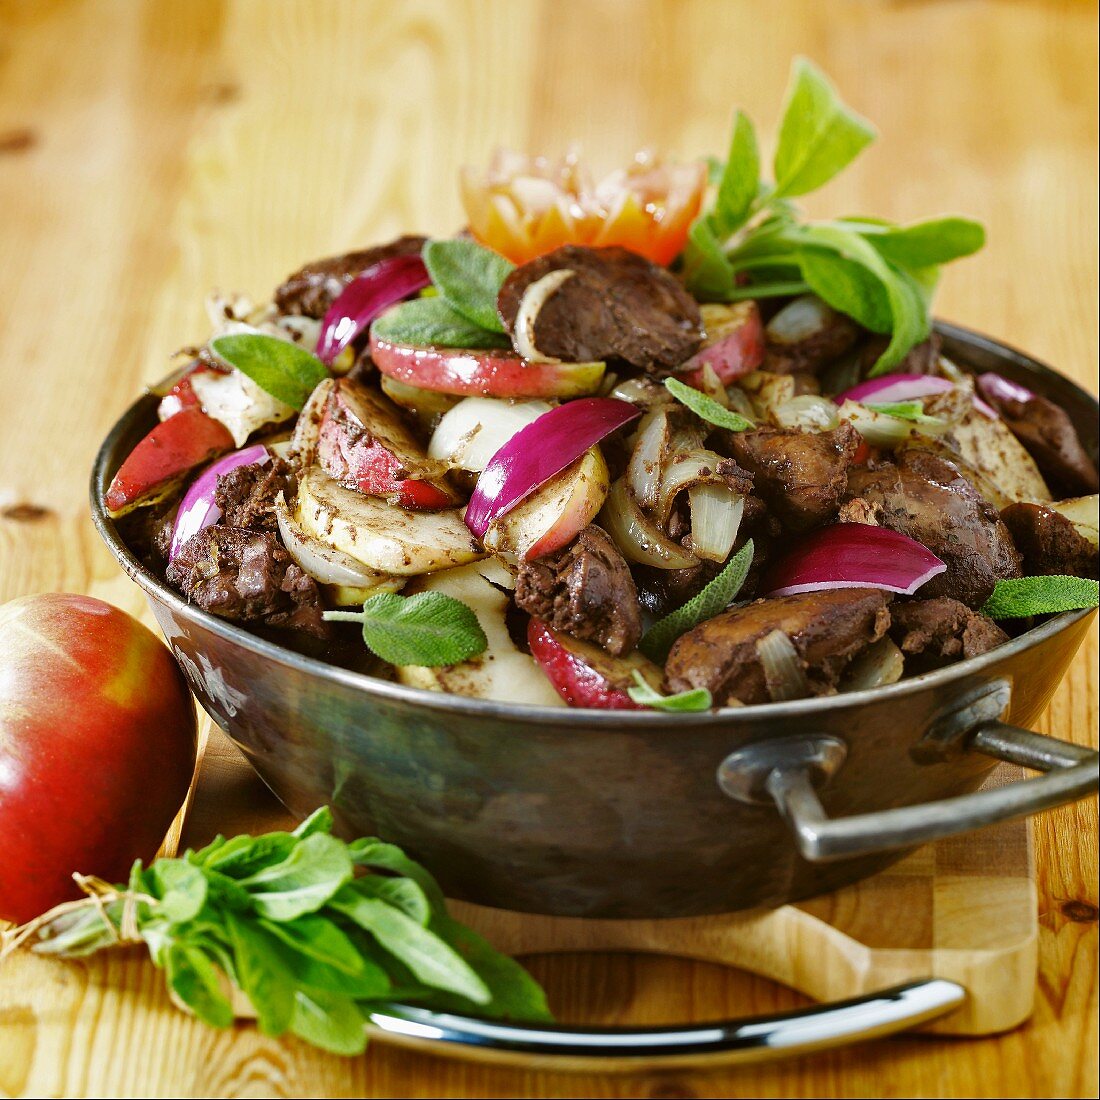 Pan-cooked chicken liver dish with apples and onions